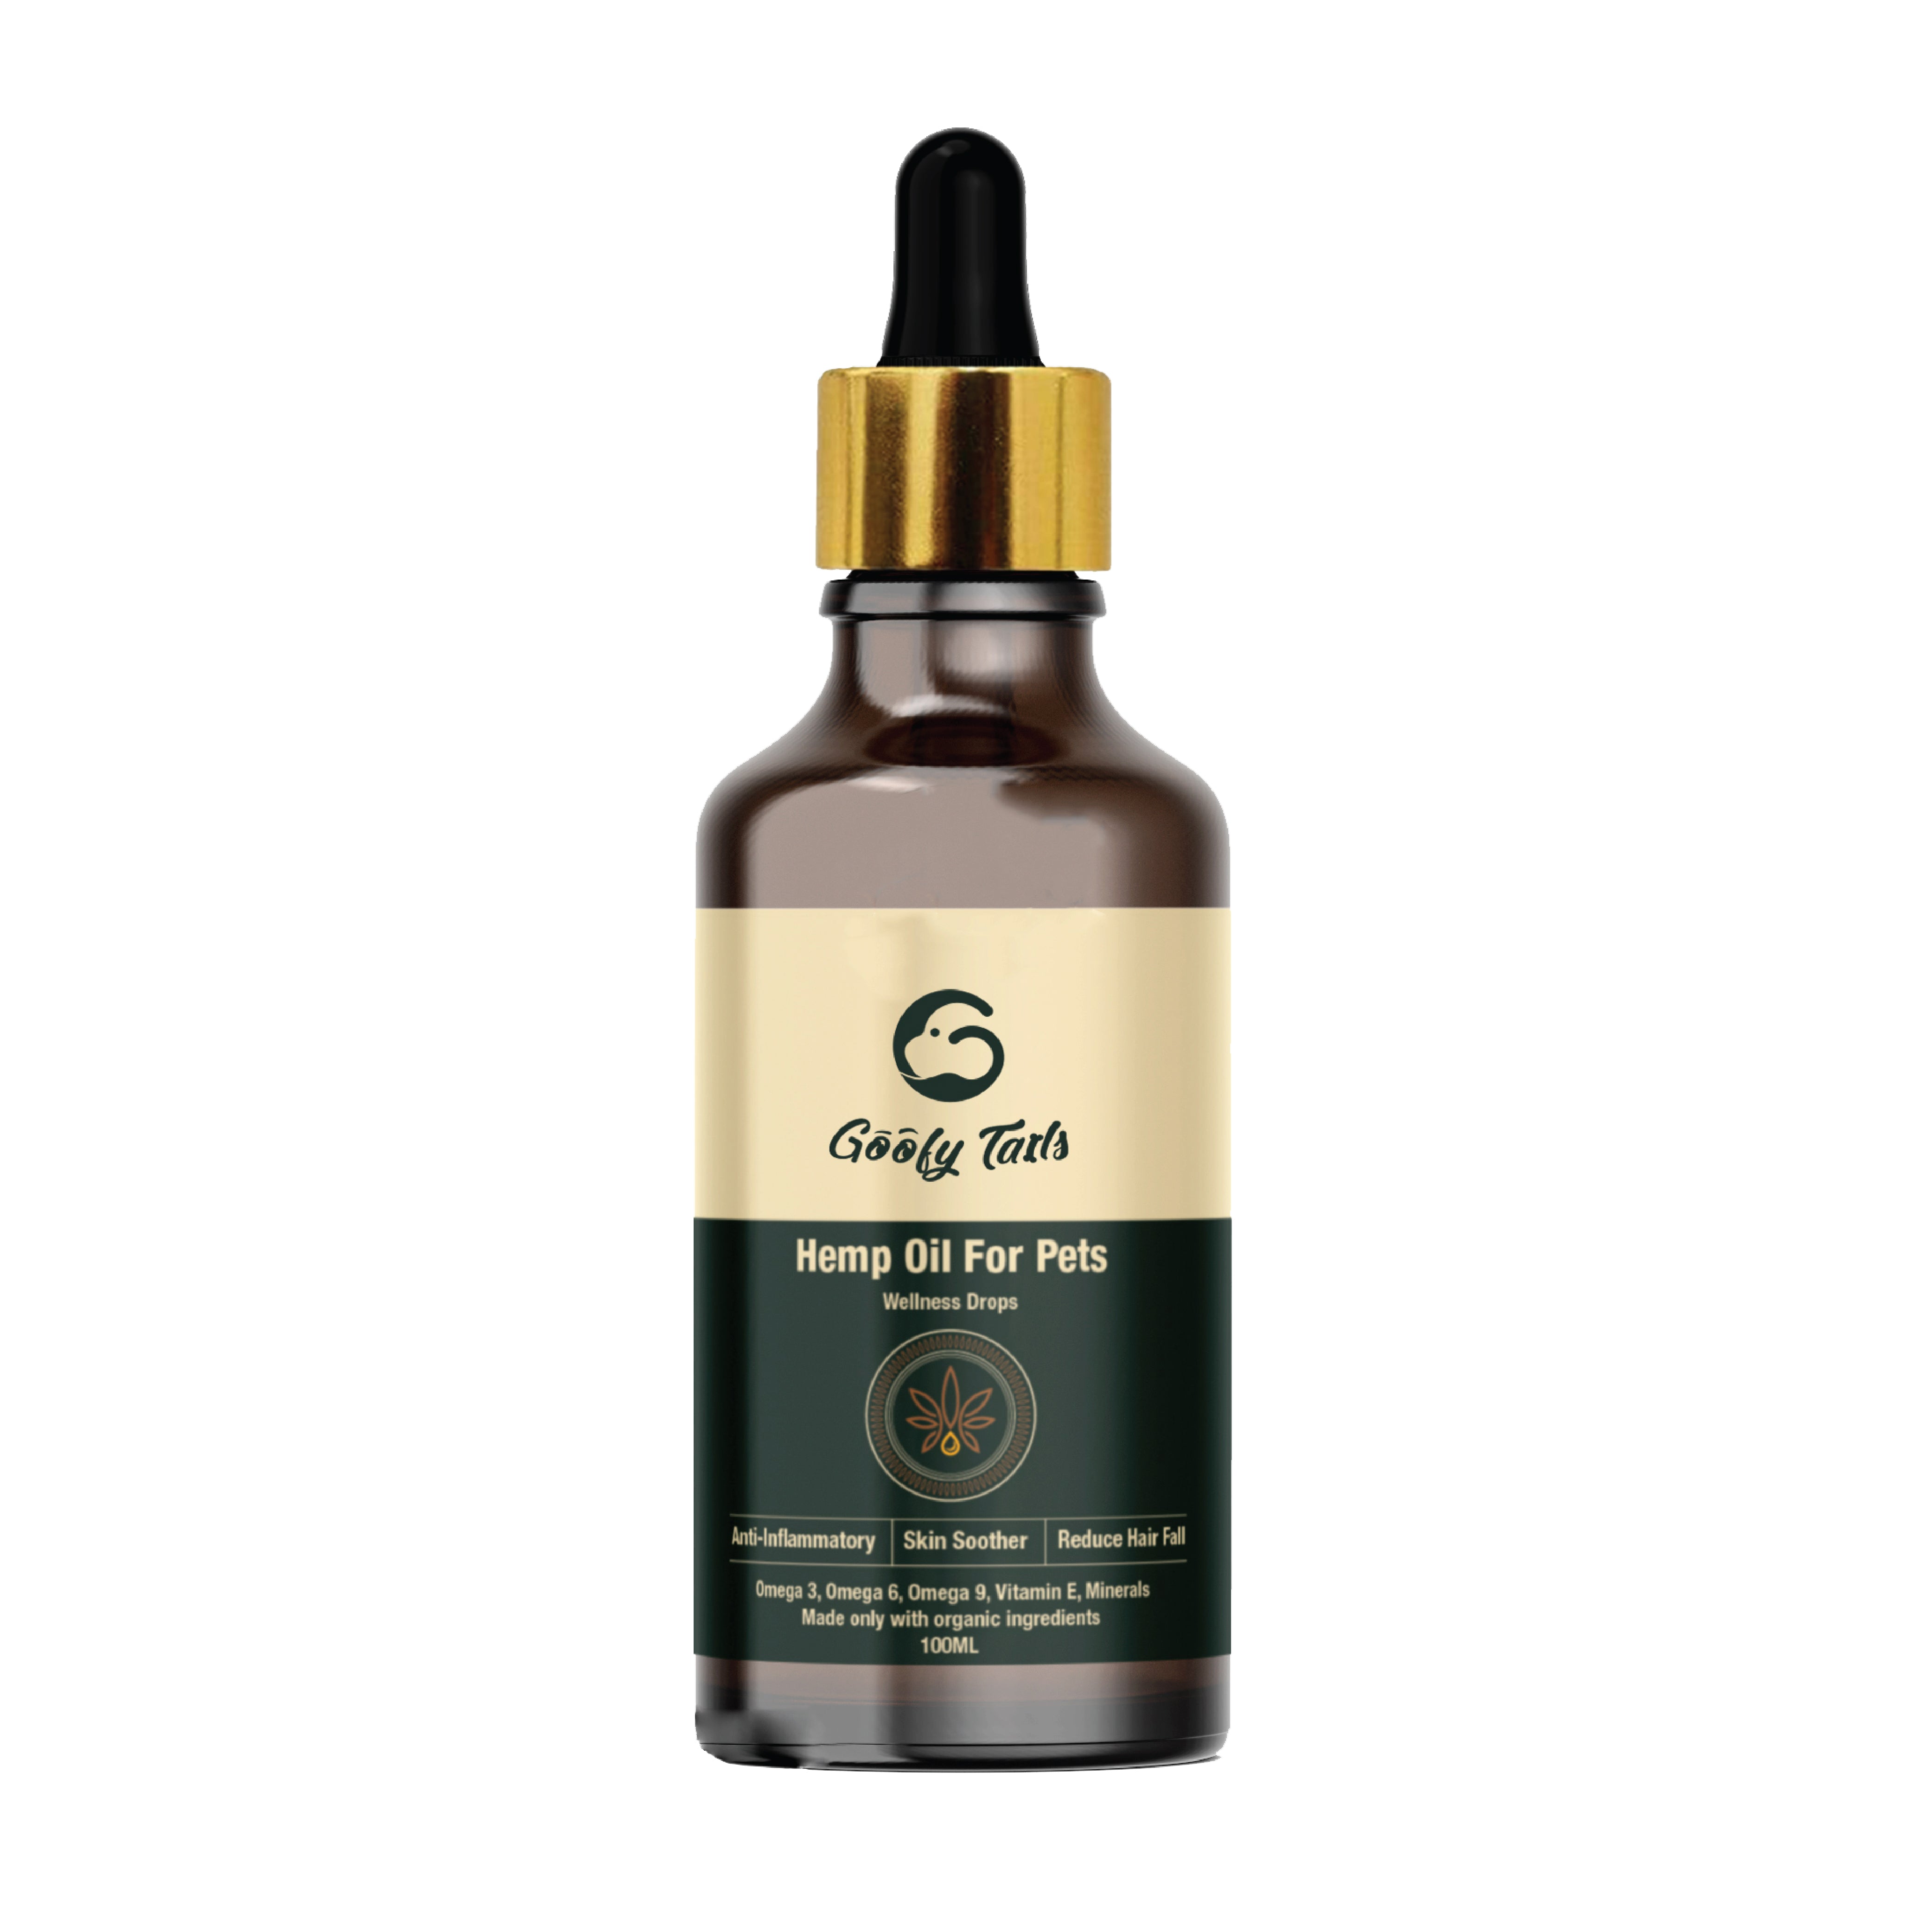 Presenting Goofy Tails Hemp oil for cats and kittens